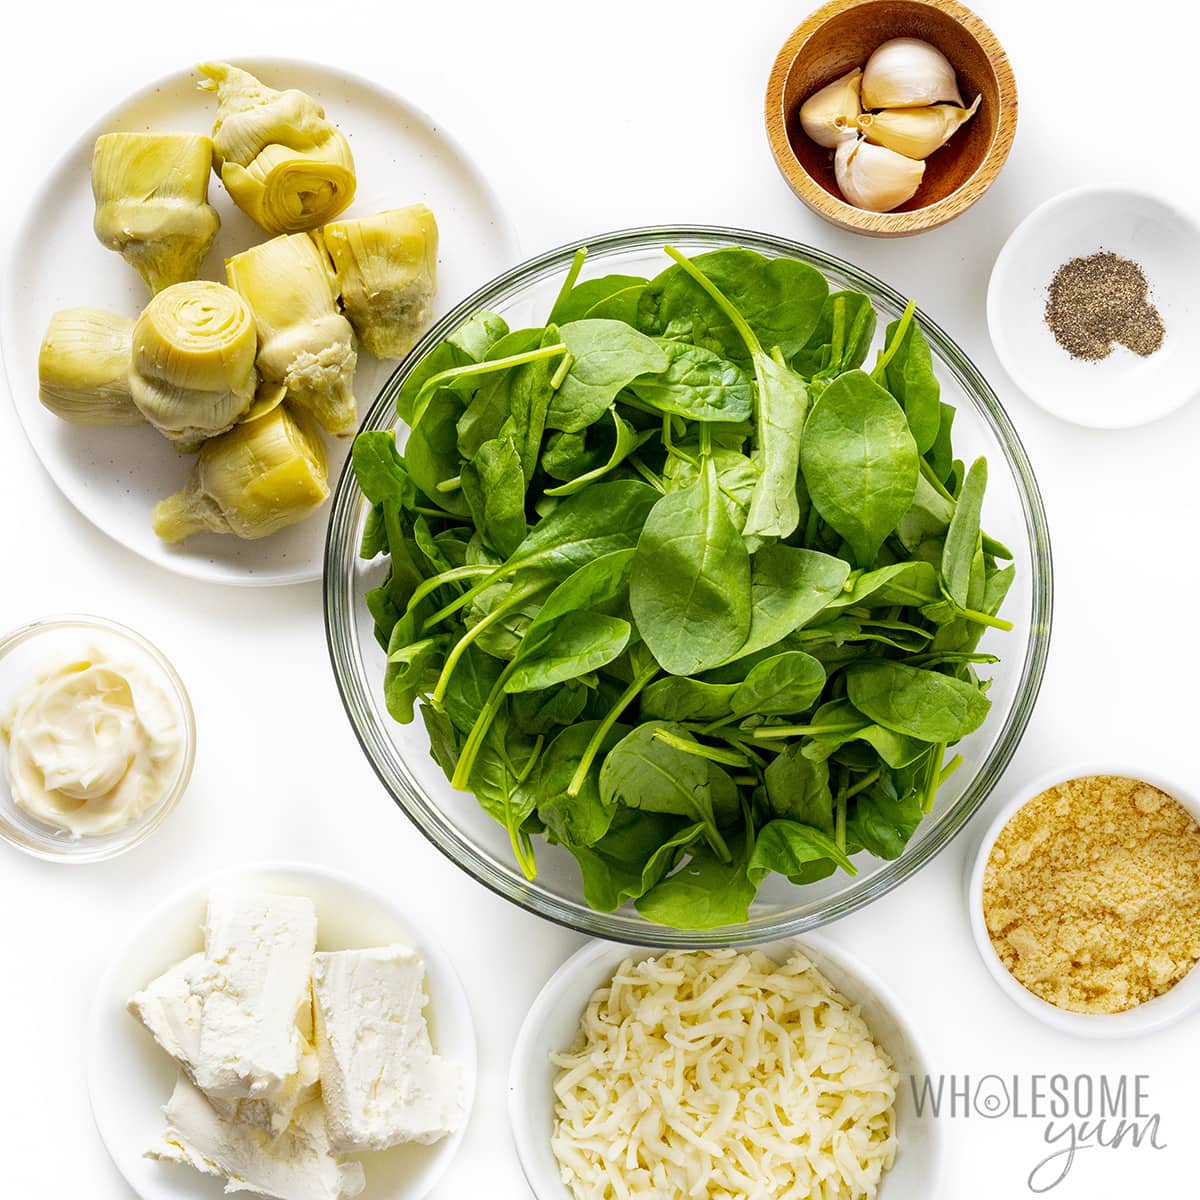 Toppings for Spinach Artichoke Dip in bowls.